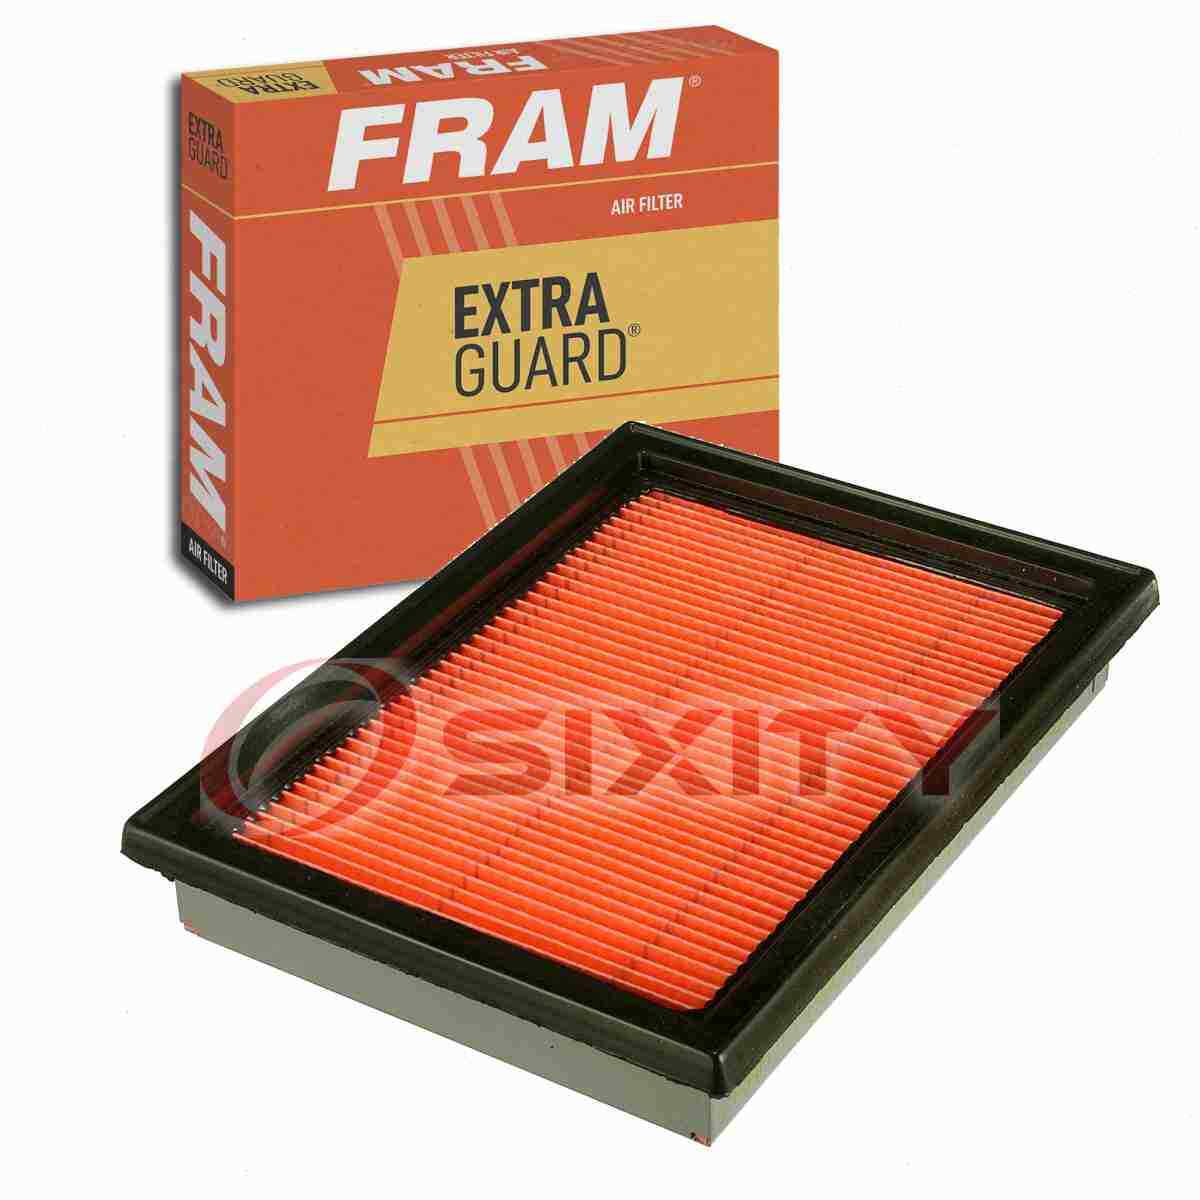 FRAM Extra Guard Air Filter for 2009-2012 Infiniti FX50 Intake Inlet it